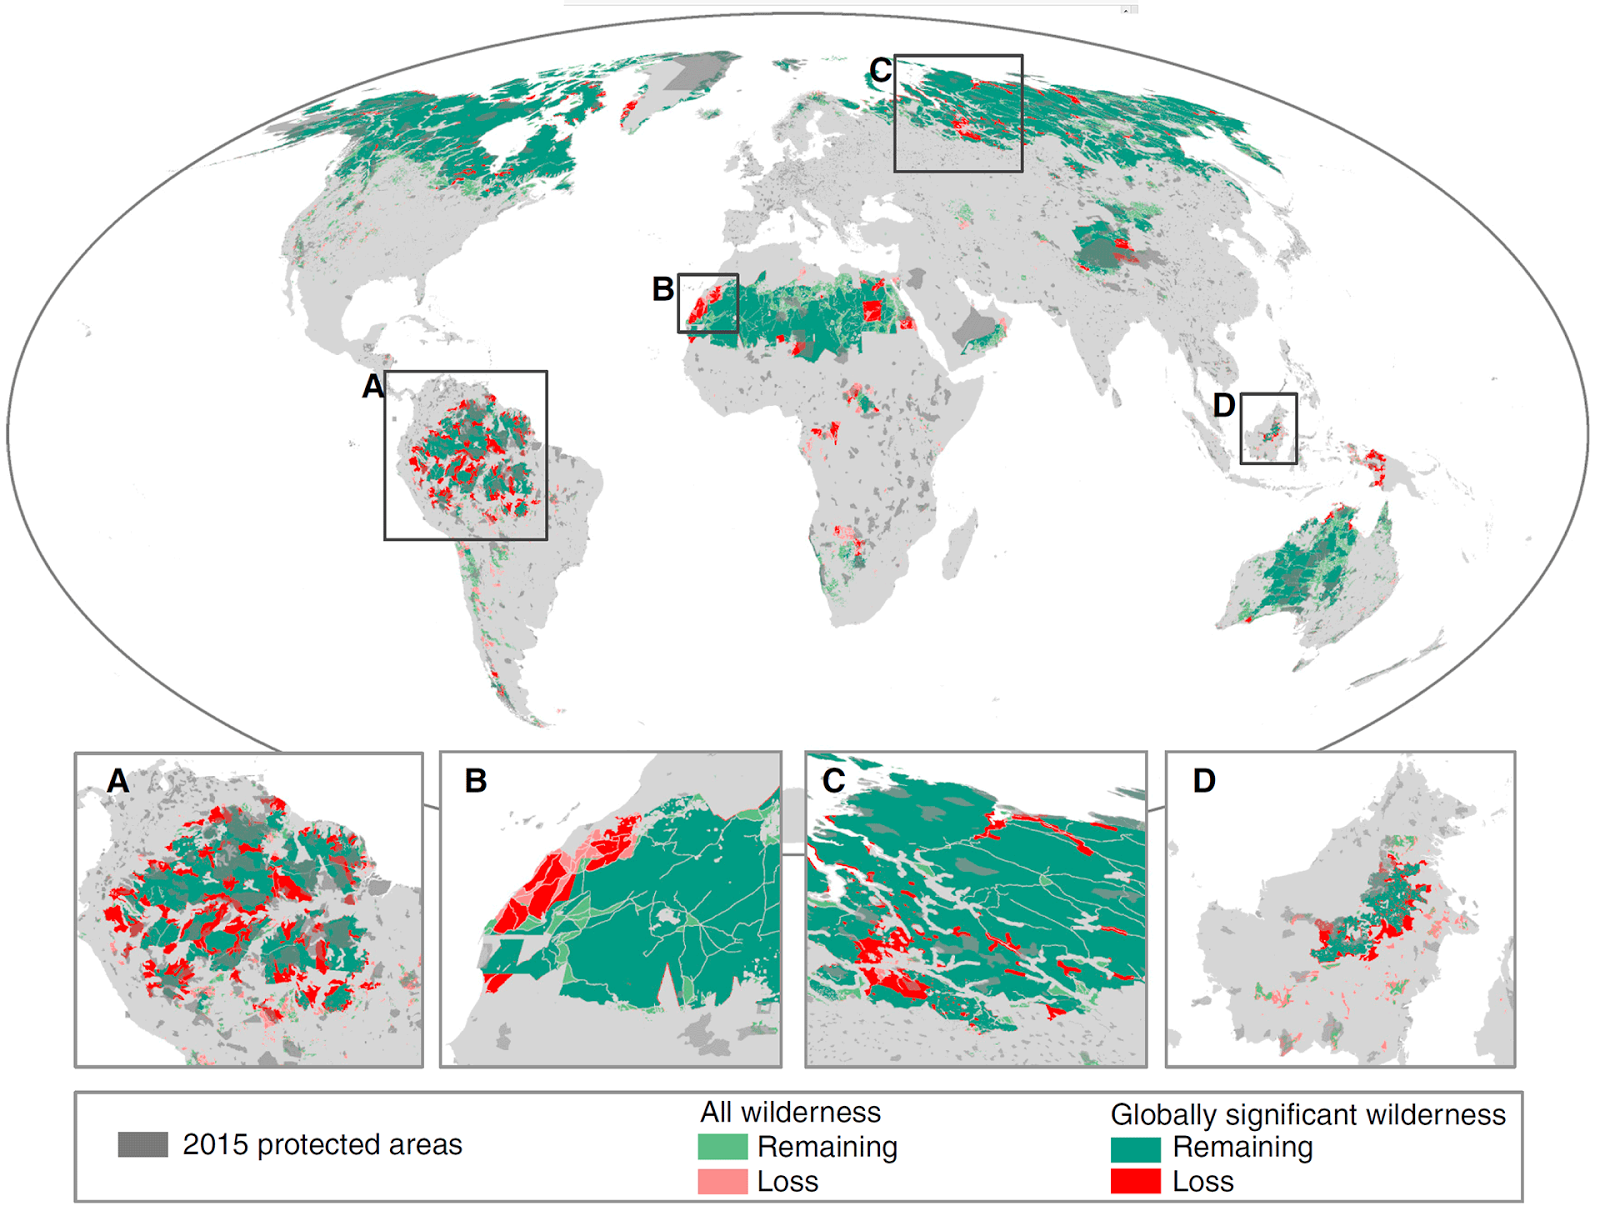 Earth has lost 10 percent of its wilderness since the early 1990s